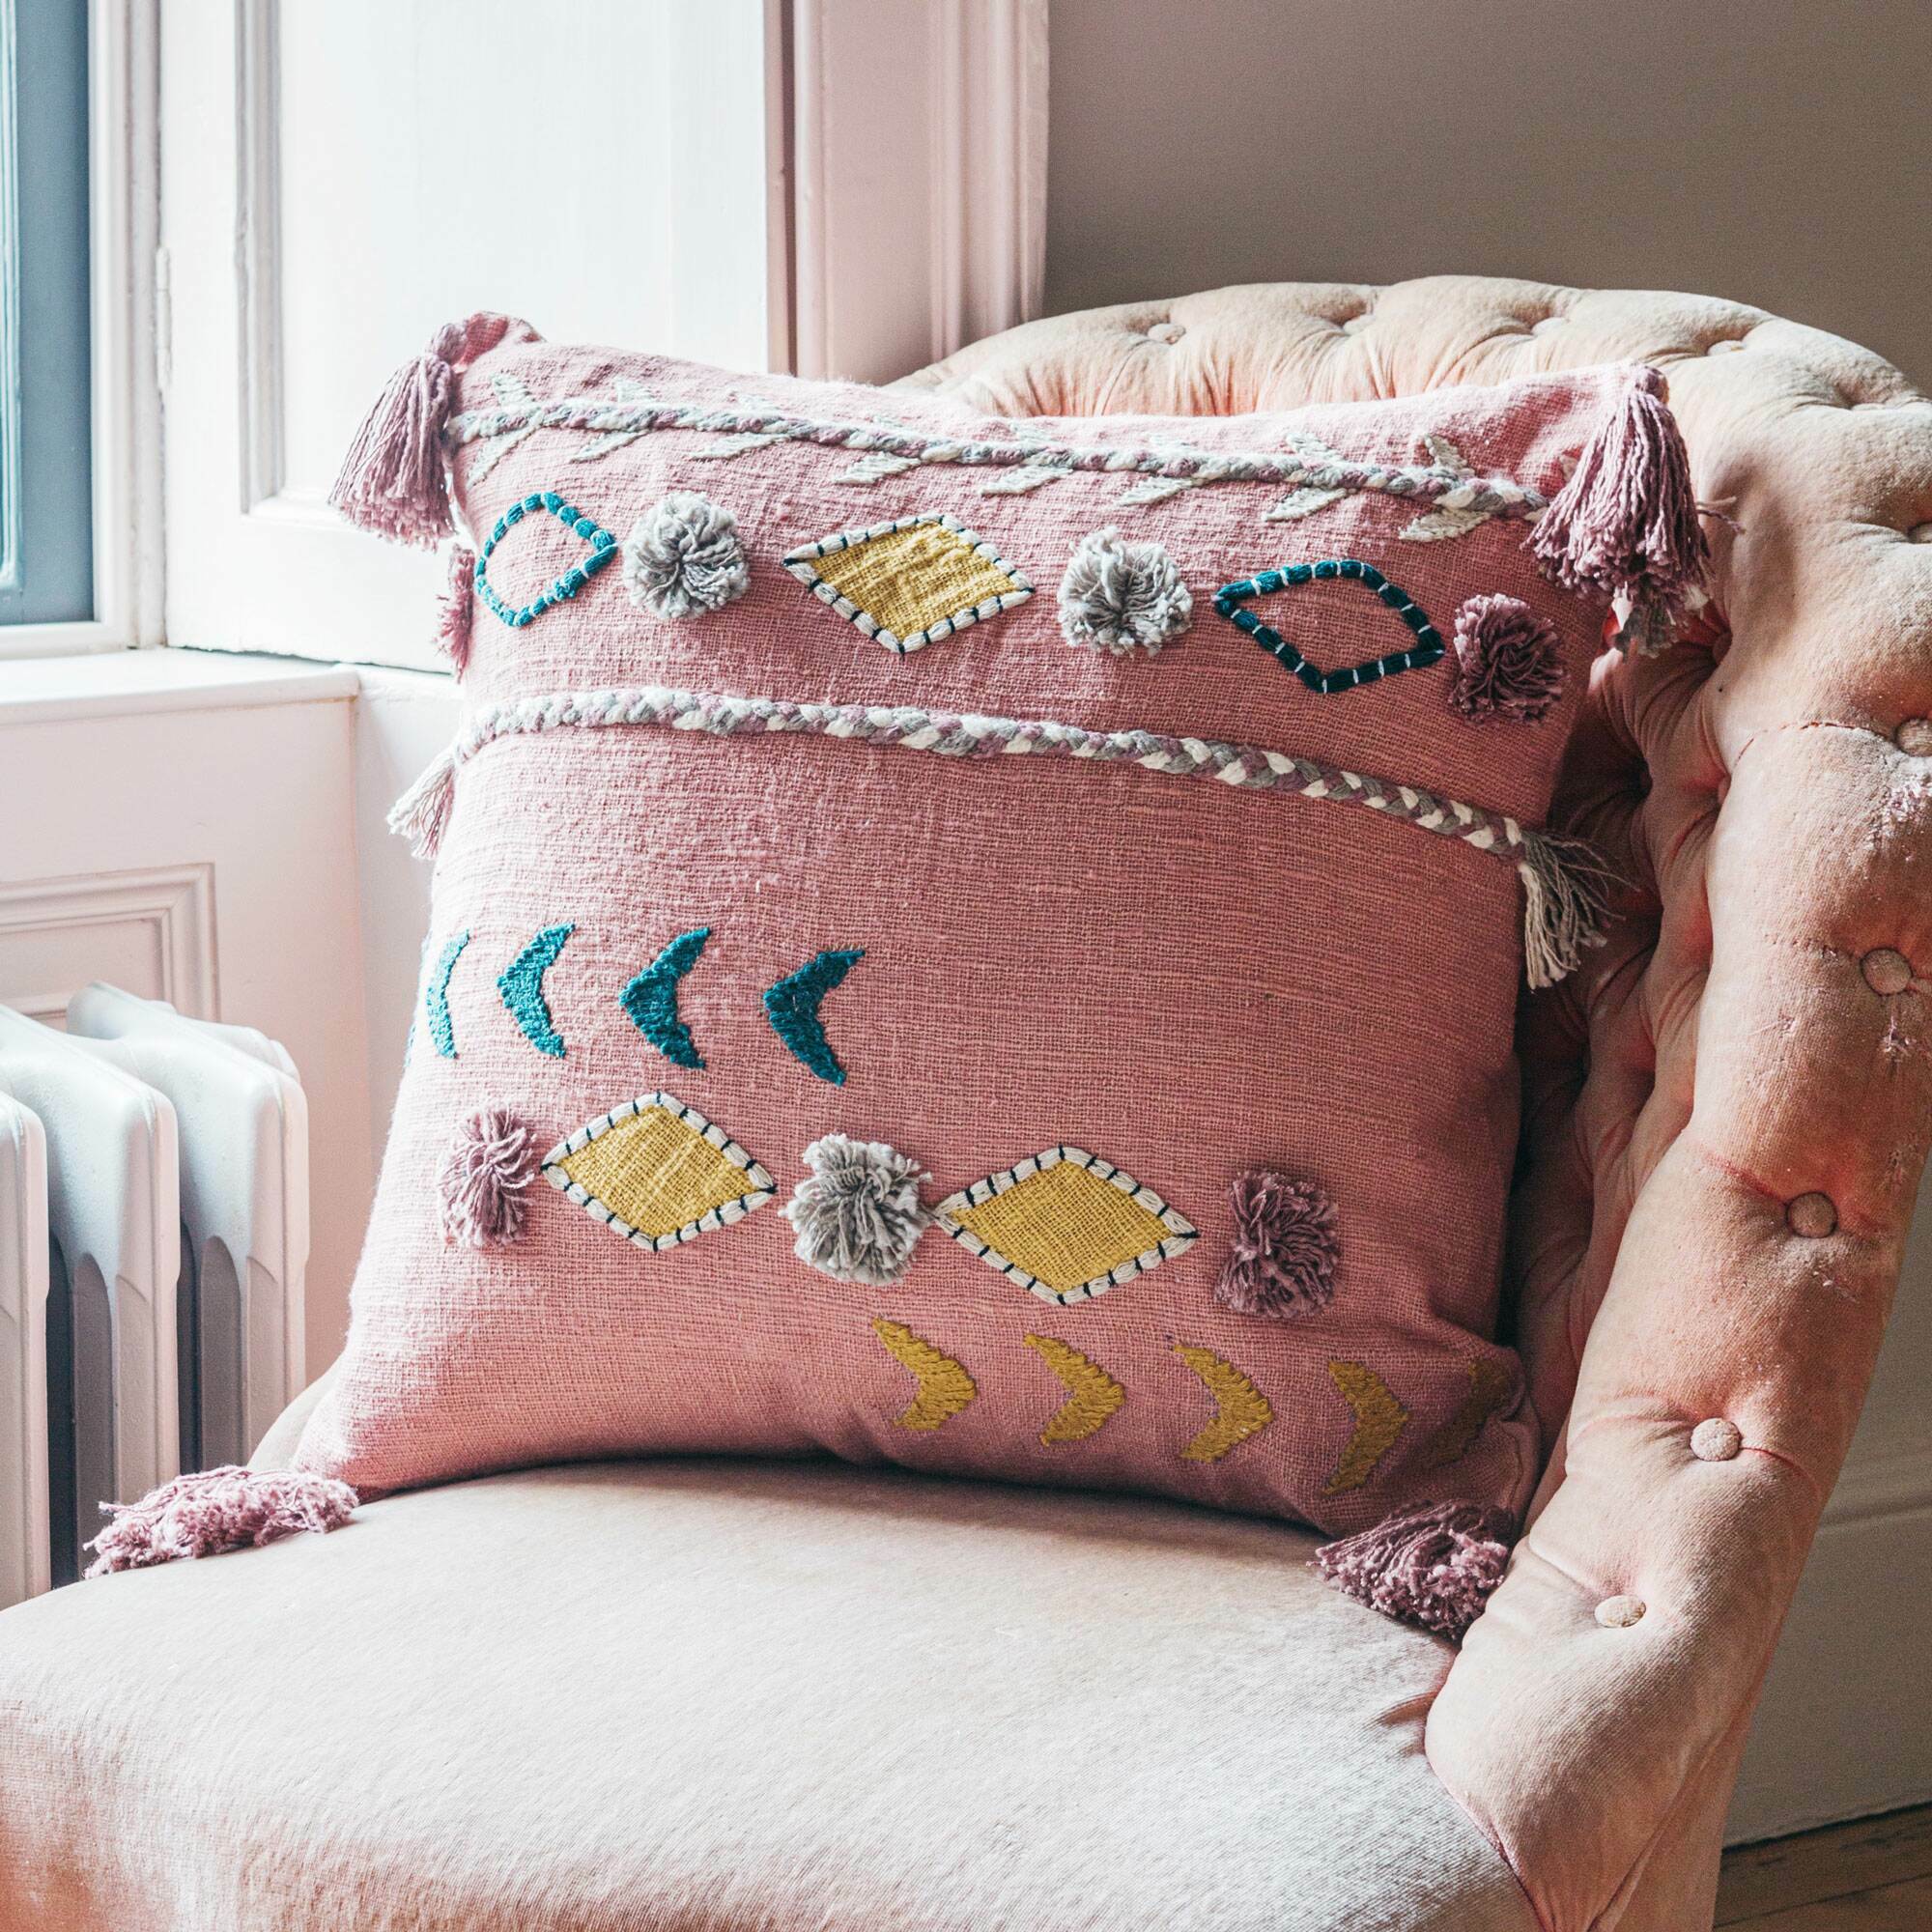 Read more about Graham and green jaz two stripe square cushion with pom poms